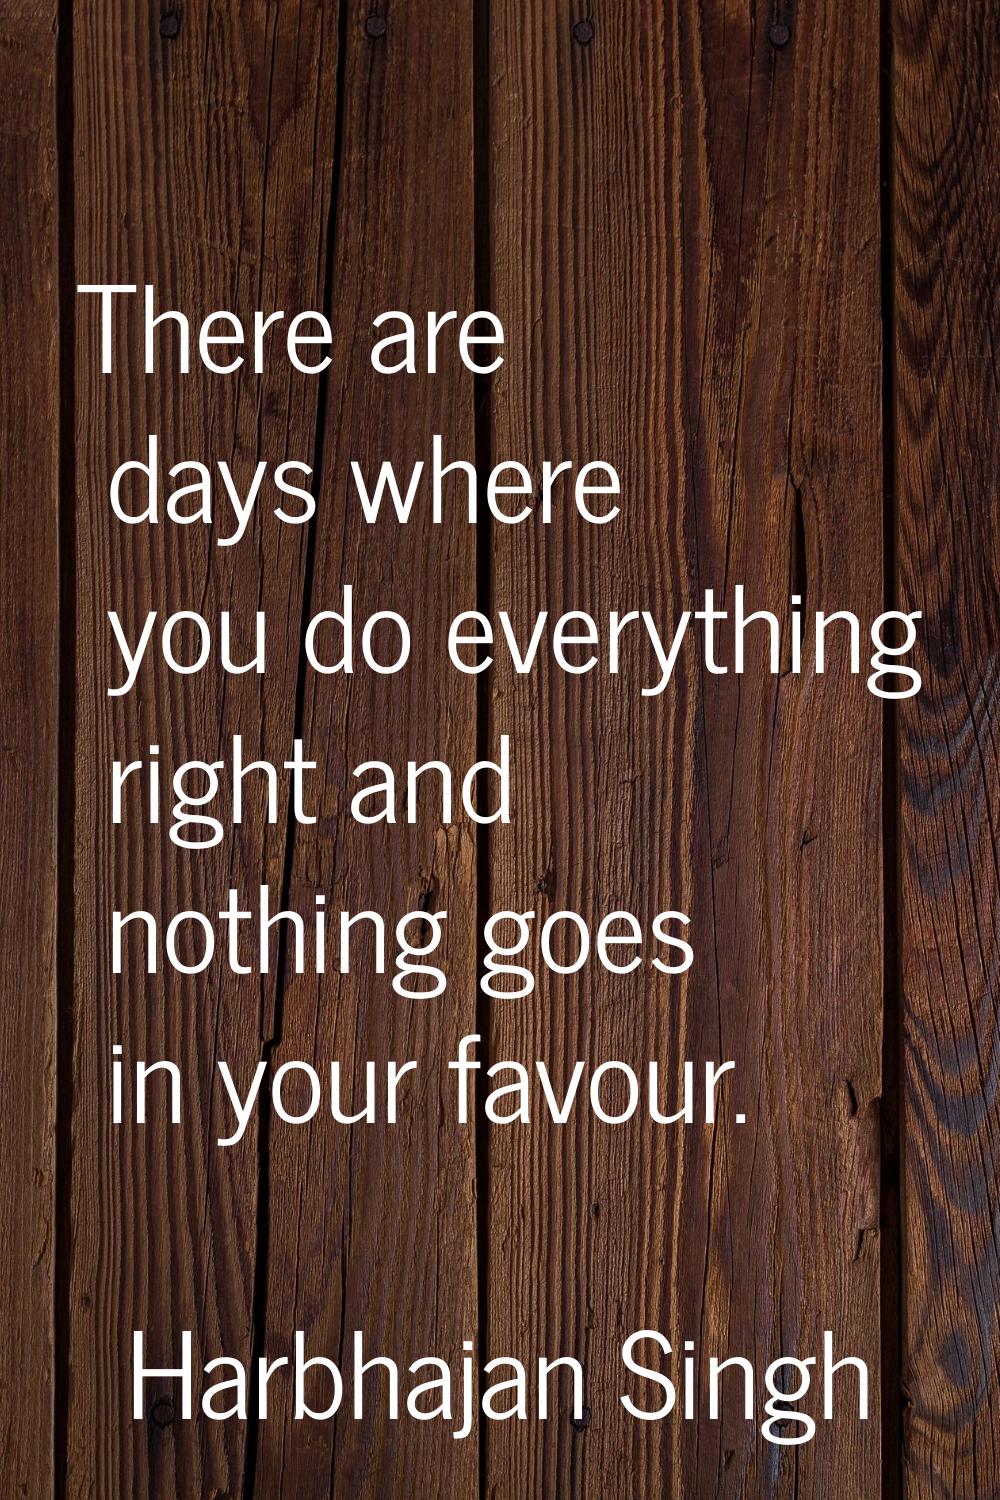 There are days where you do everything right and nothing goes in your favour.